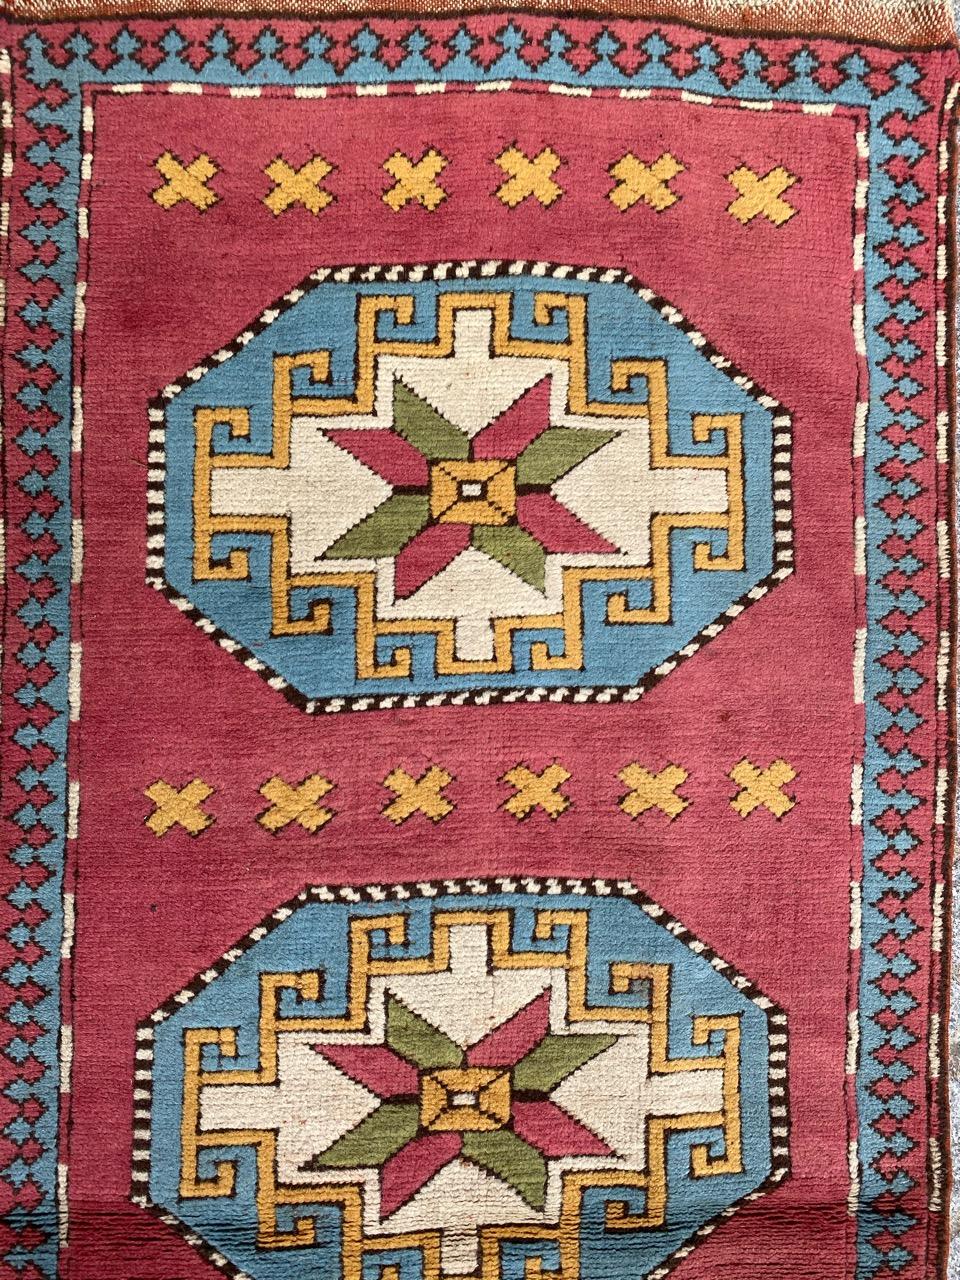 Very beautiful long corridor carpet from Turkey, Kars region, with pretty geometric and Caucasian designs, and pretty colors with a pink background, entirely hand-knotted in wool velvet and wool foundation.